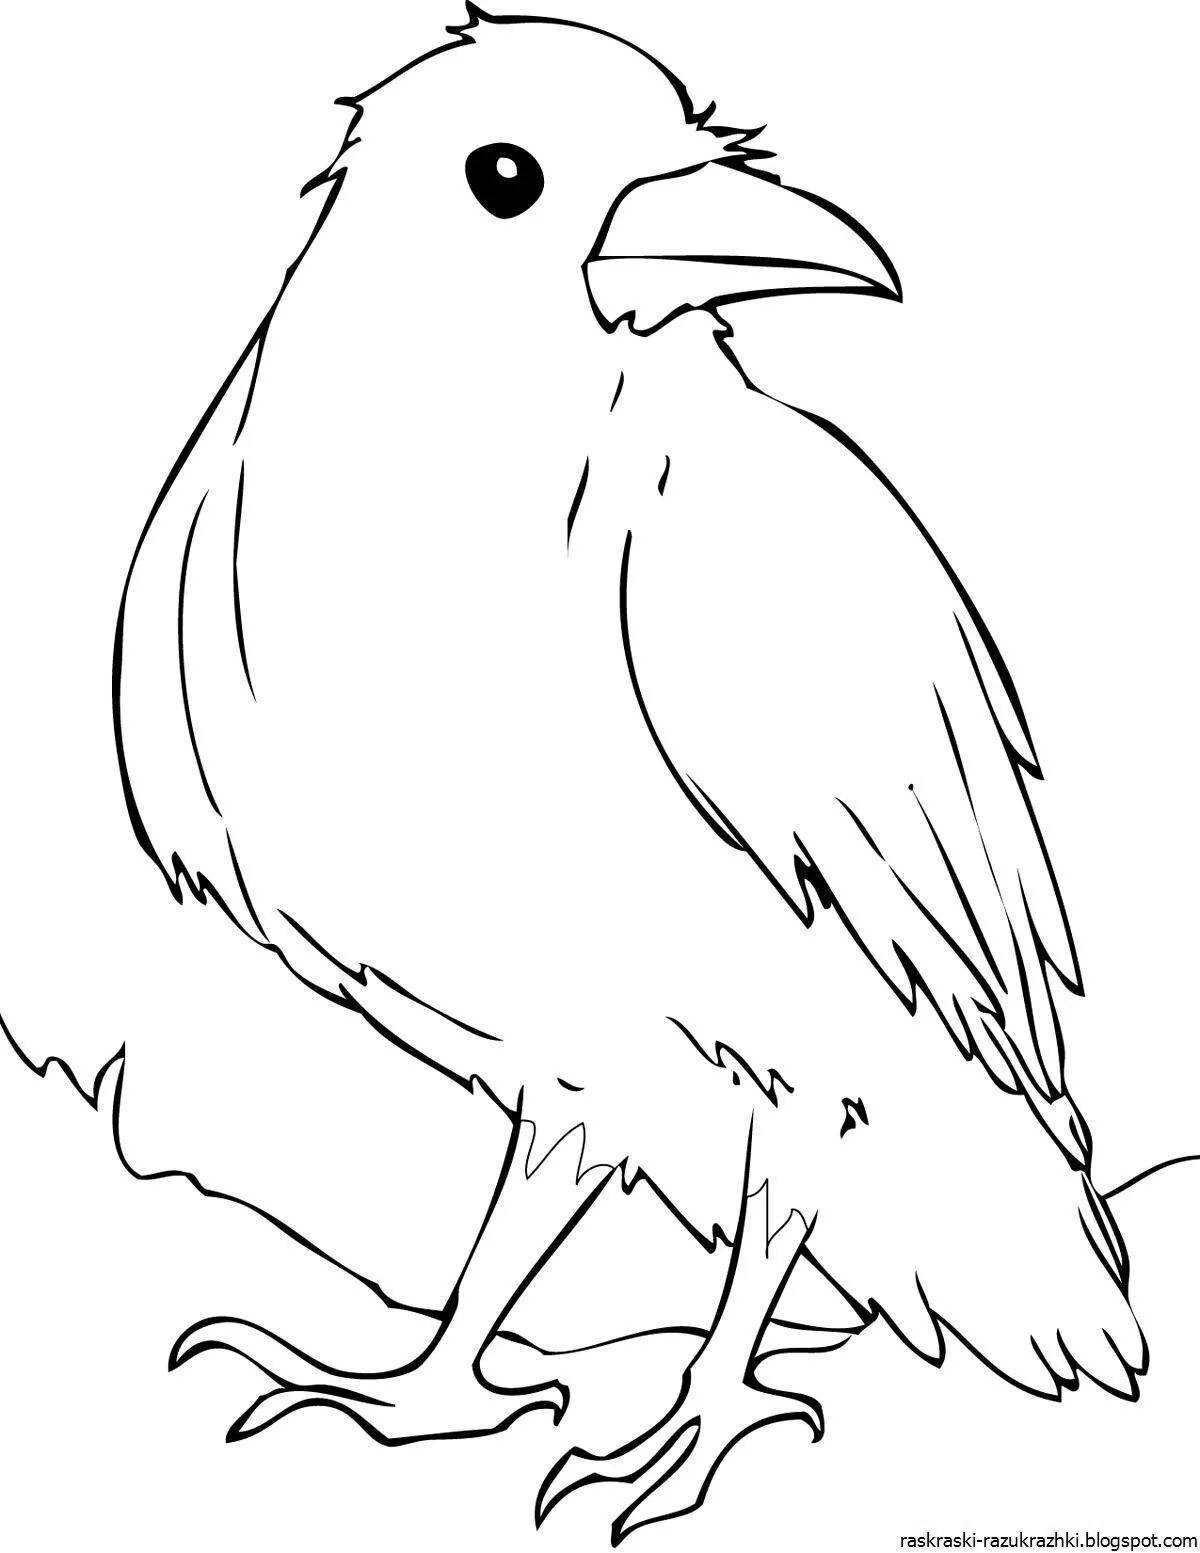 Colorful crow coloring page for kids